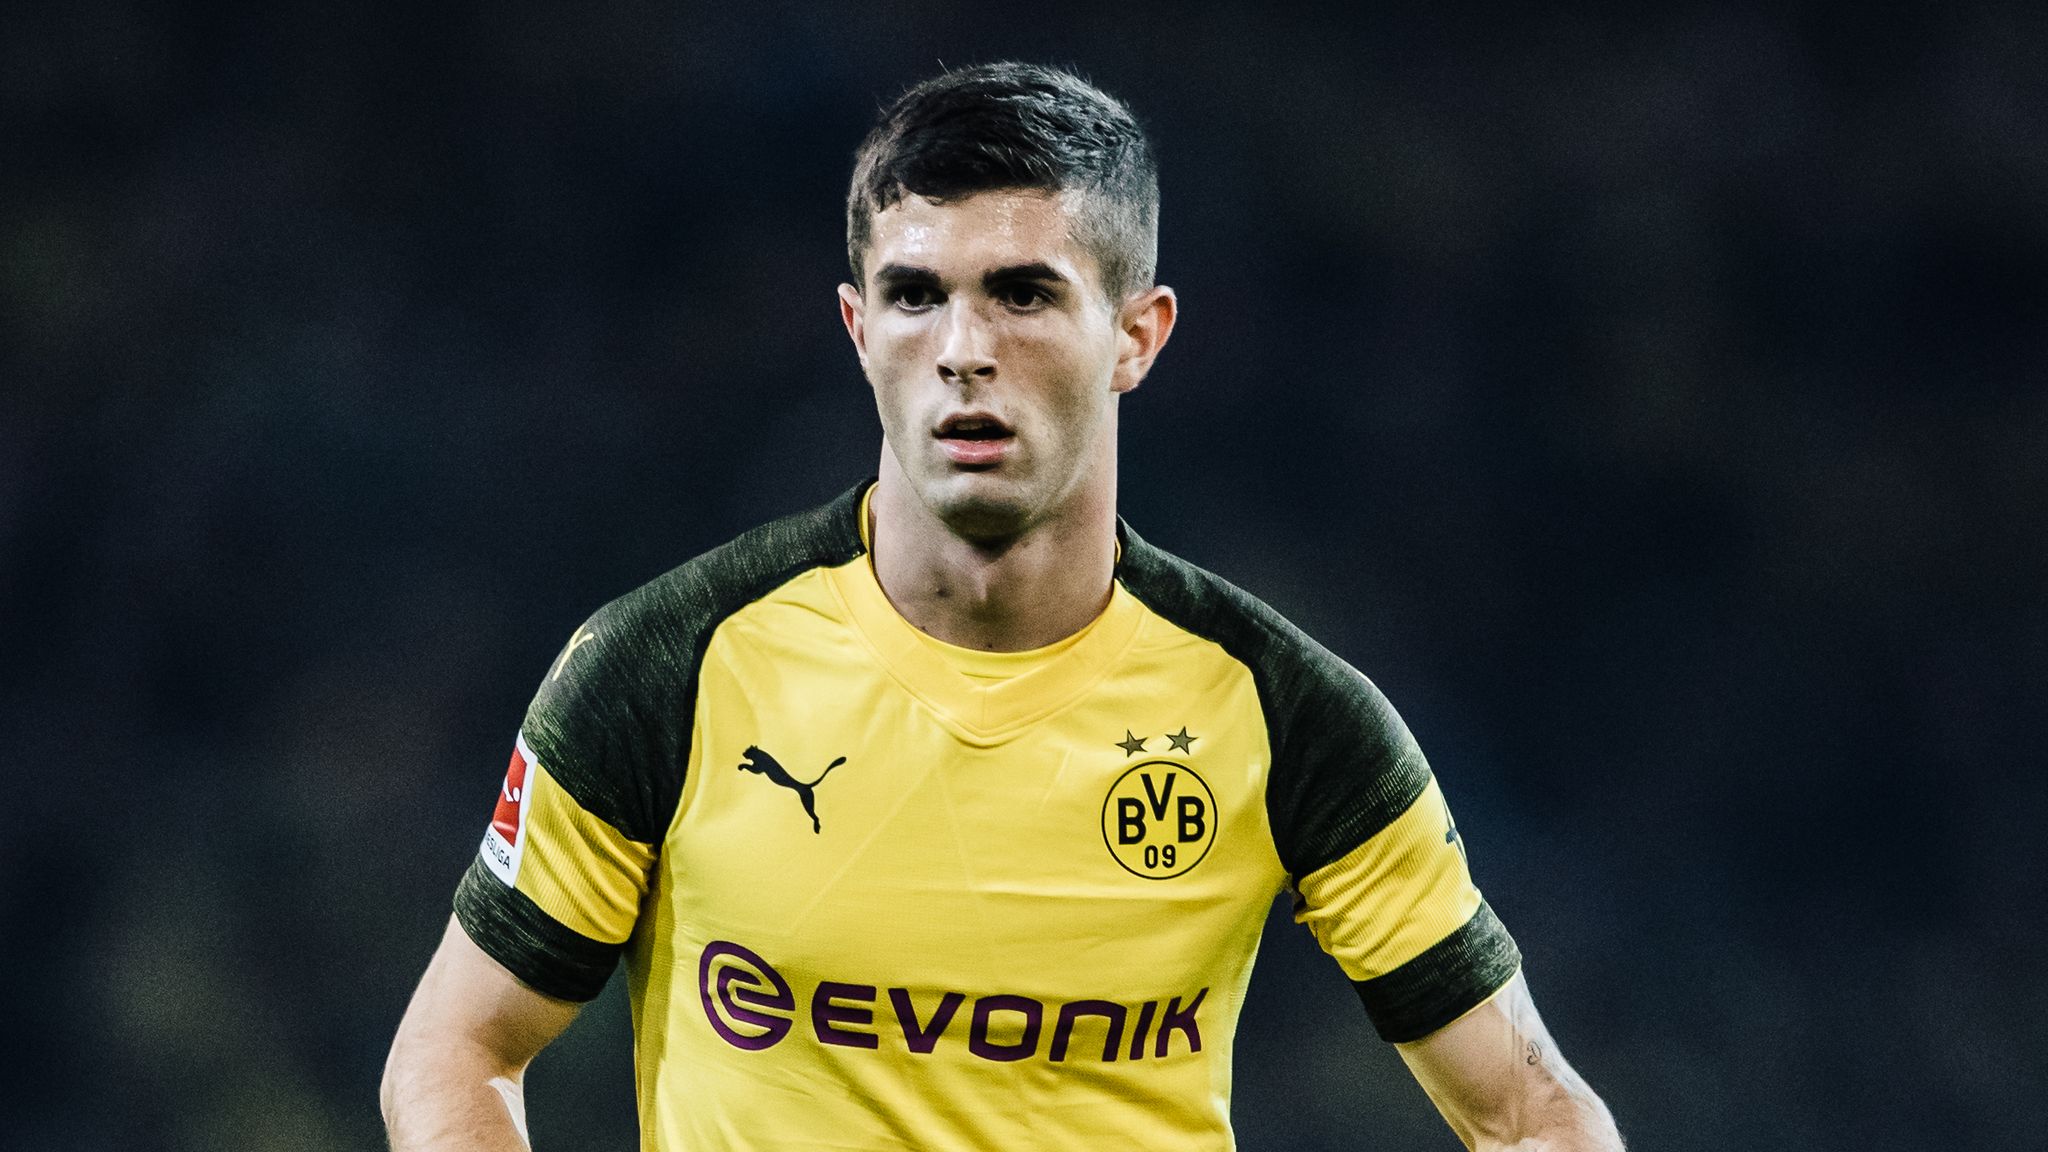 Christian Pulisic arrives in style! AC Milan show off new Off-White gear  ahead of Champions League clash with Borussia Dortmund